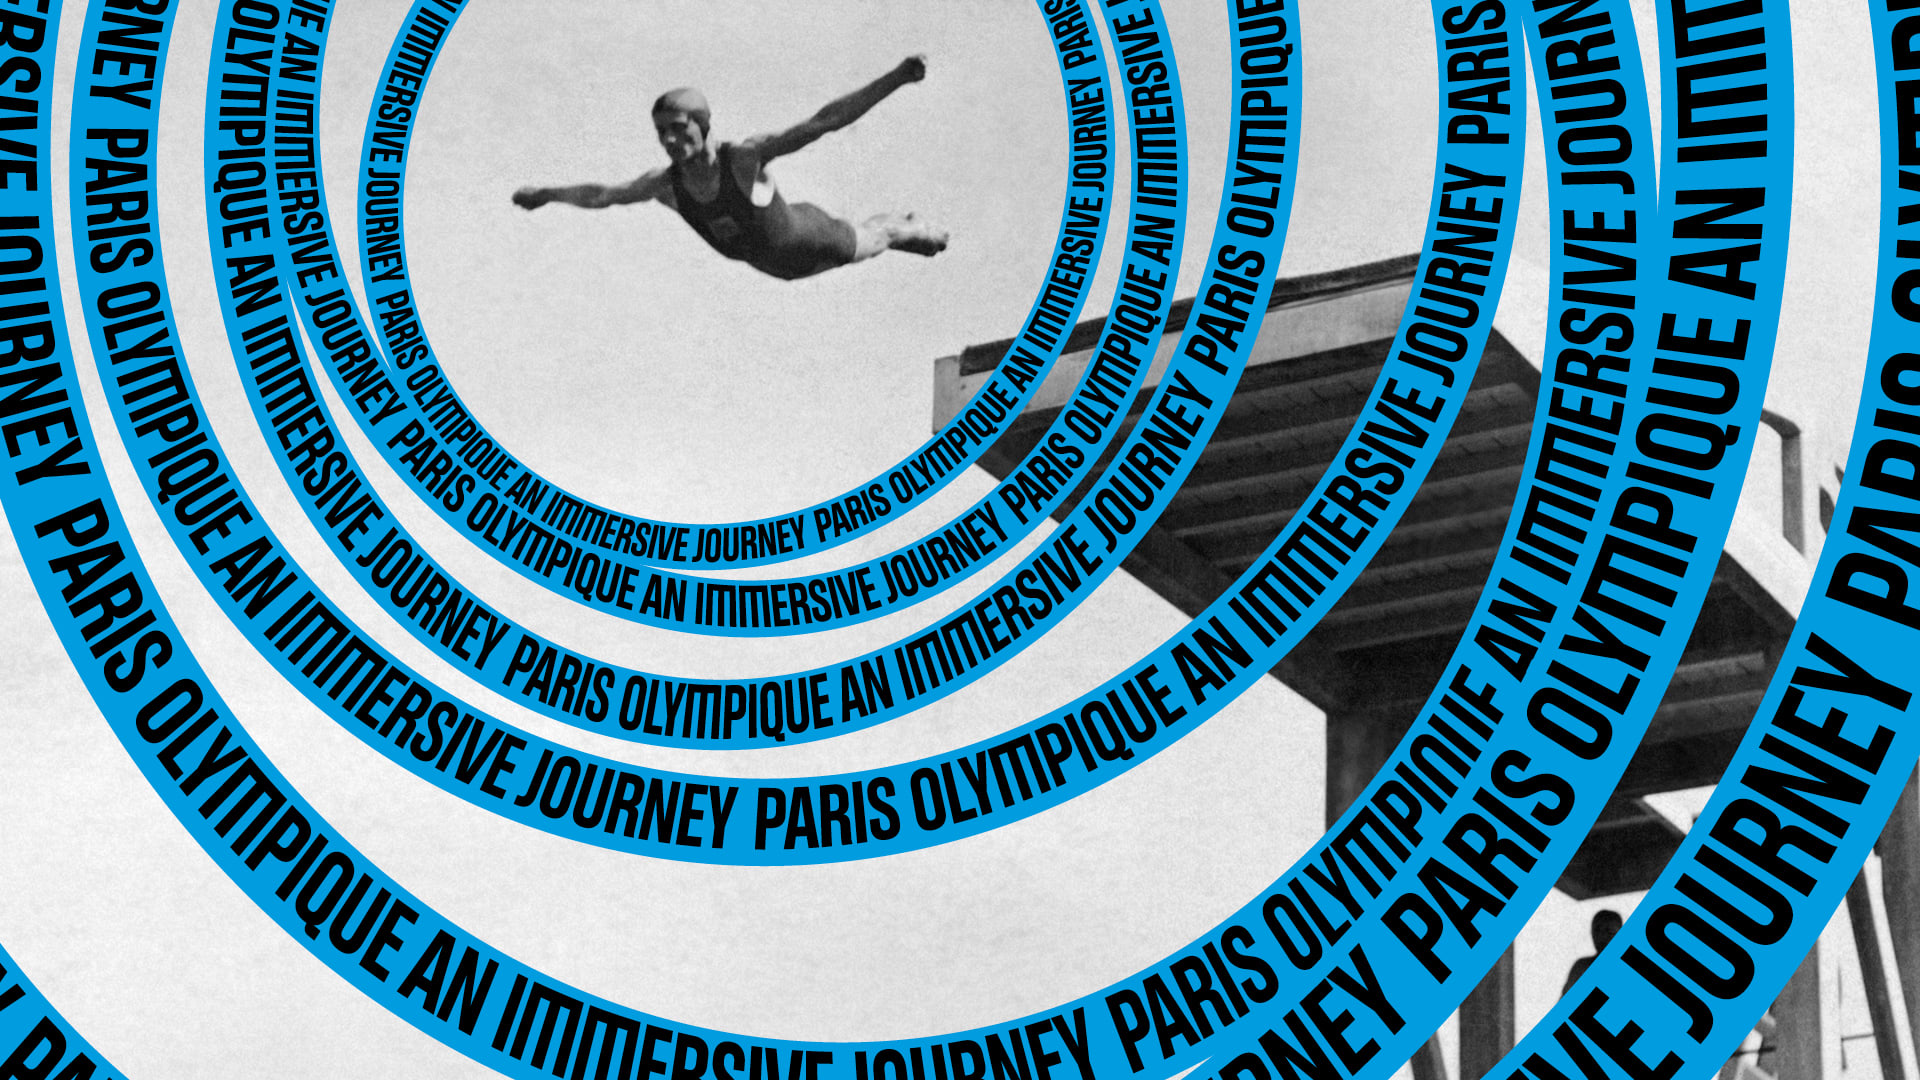 Exhibition Paris Olympique™: An Immersive Journey at the Olympic Museum © 2024 / IOC